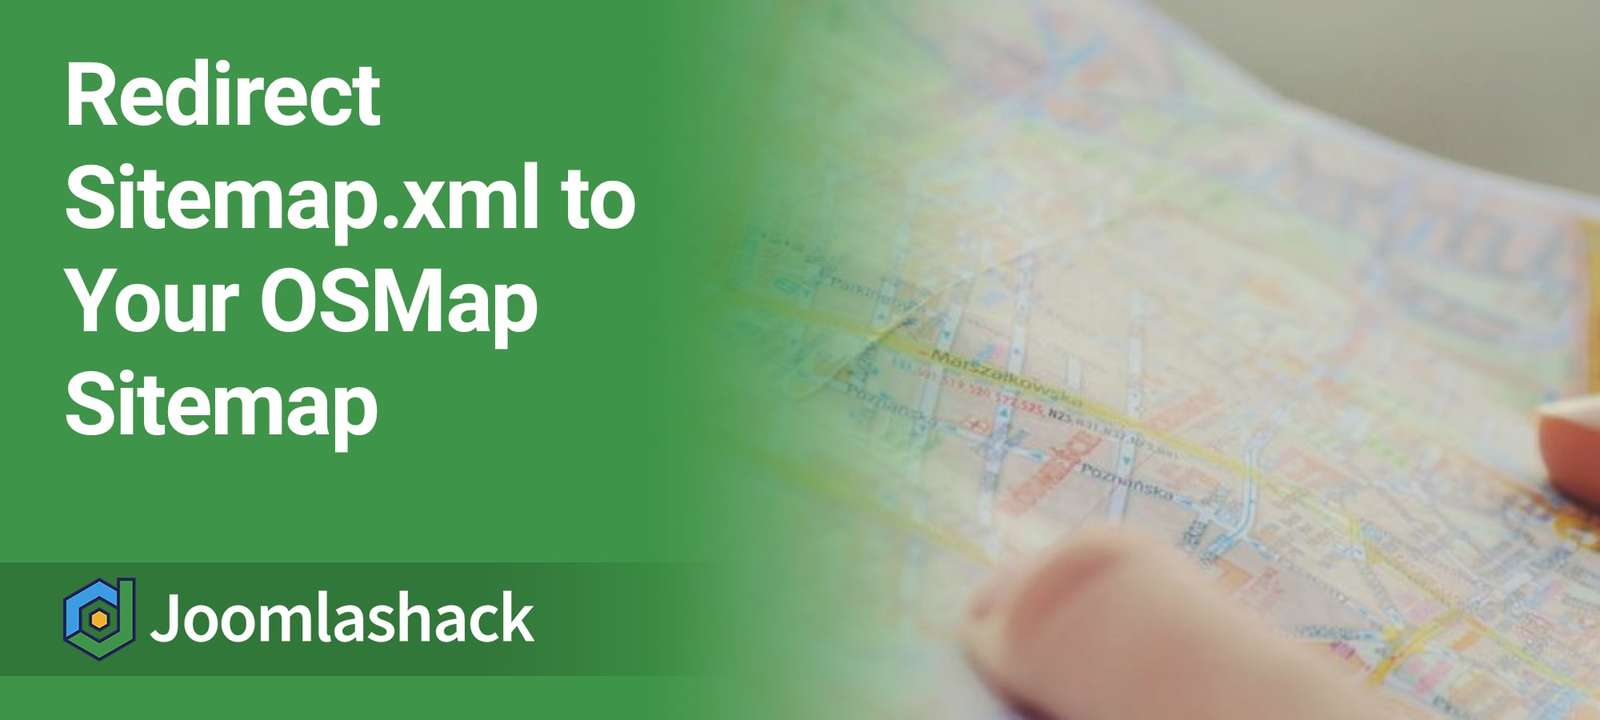 How to Redirect Sitemap.xml to Your OSMap Sitemap